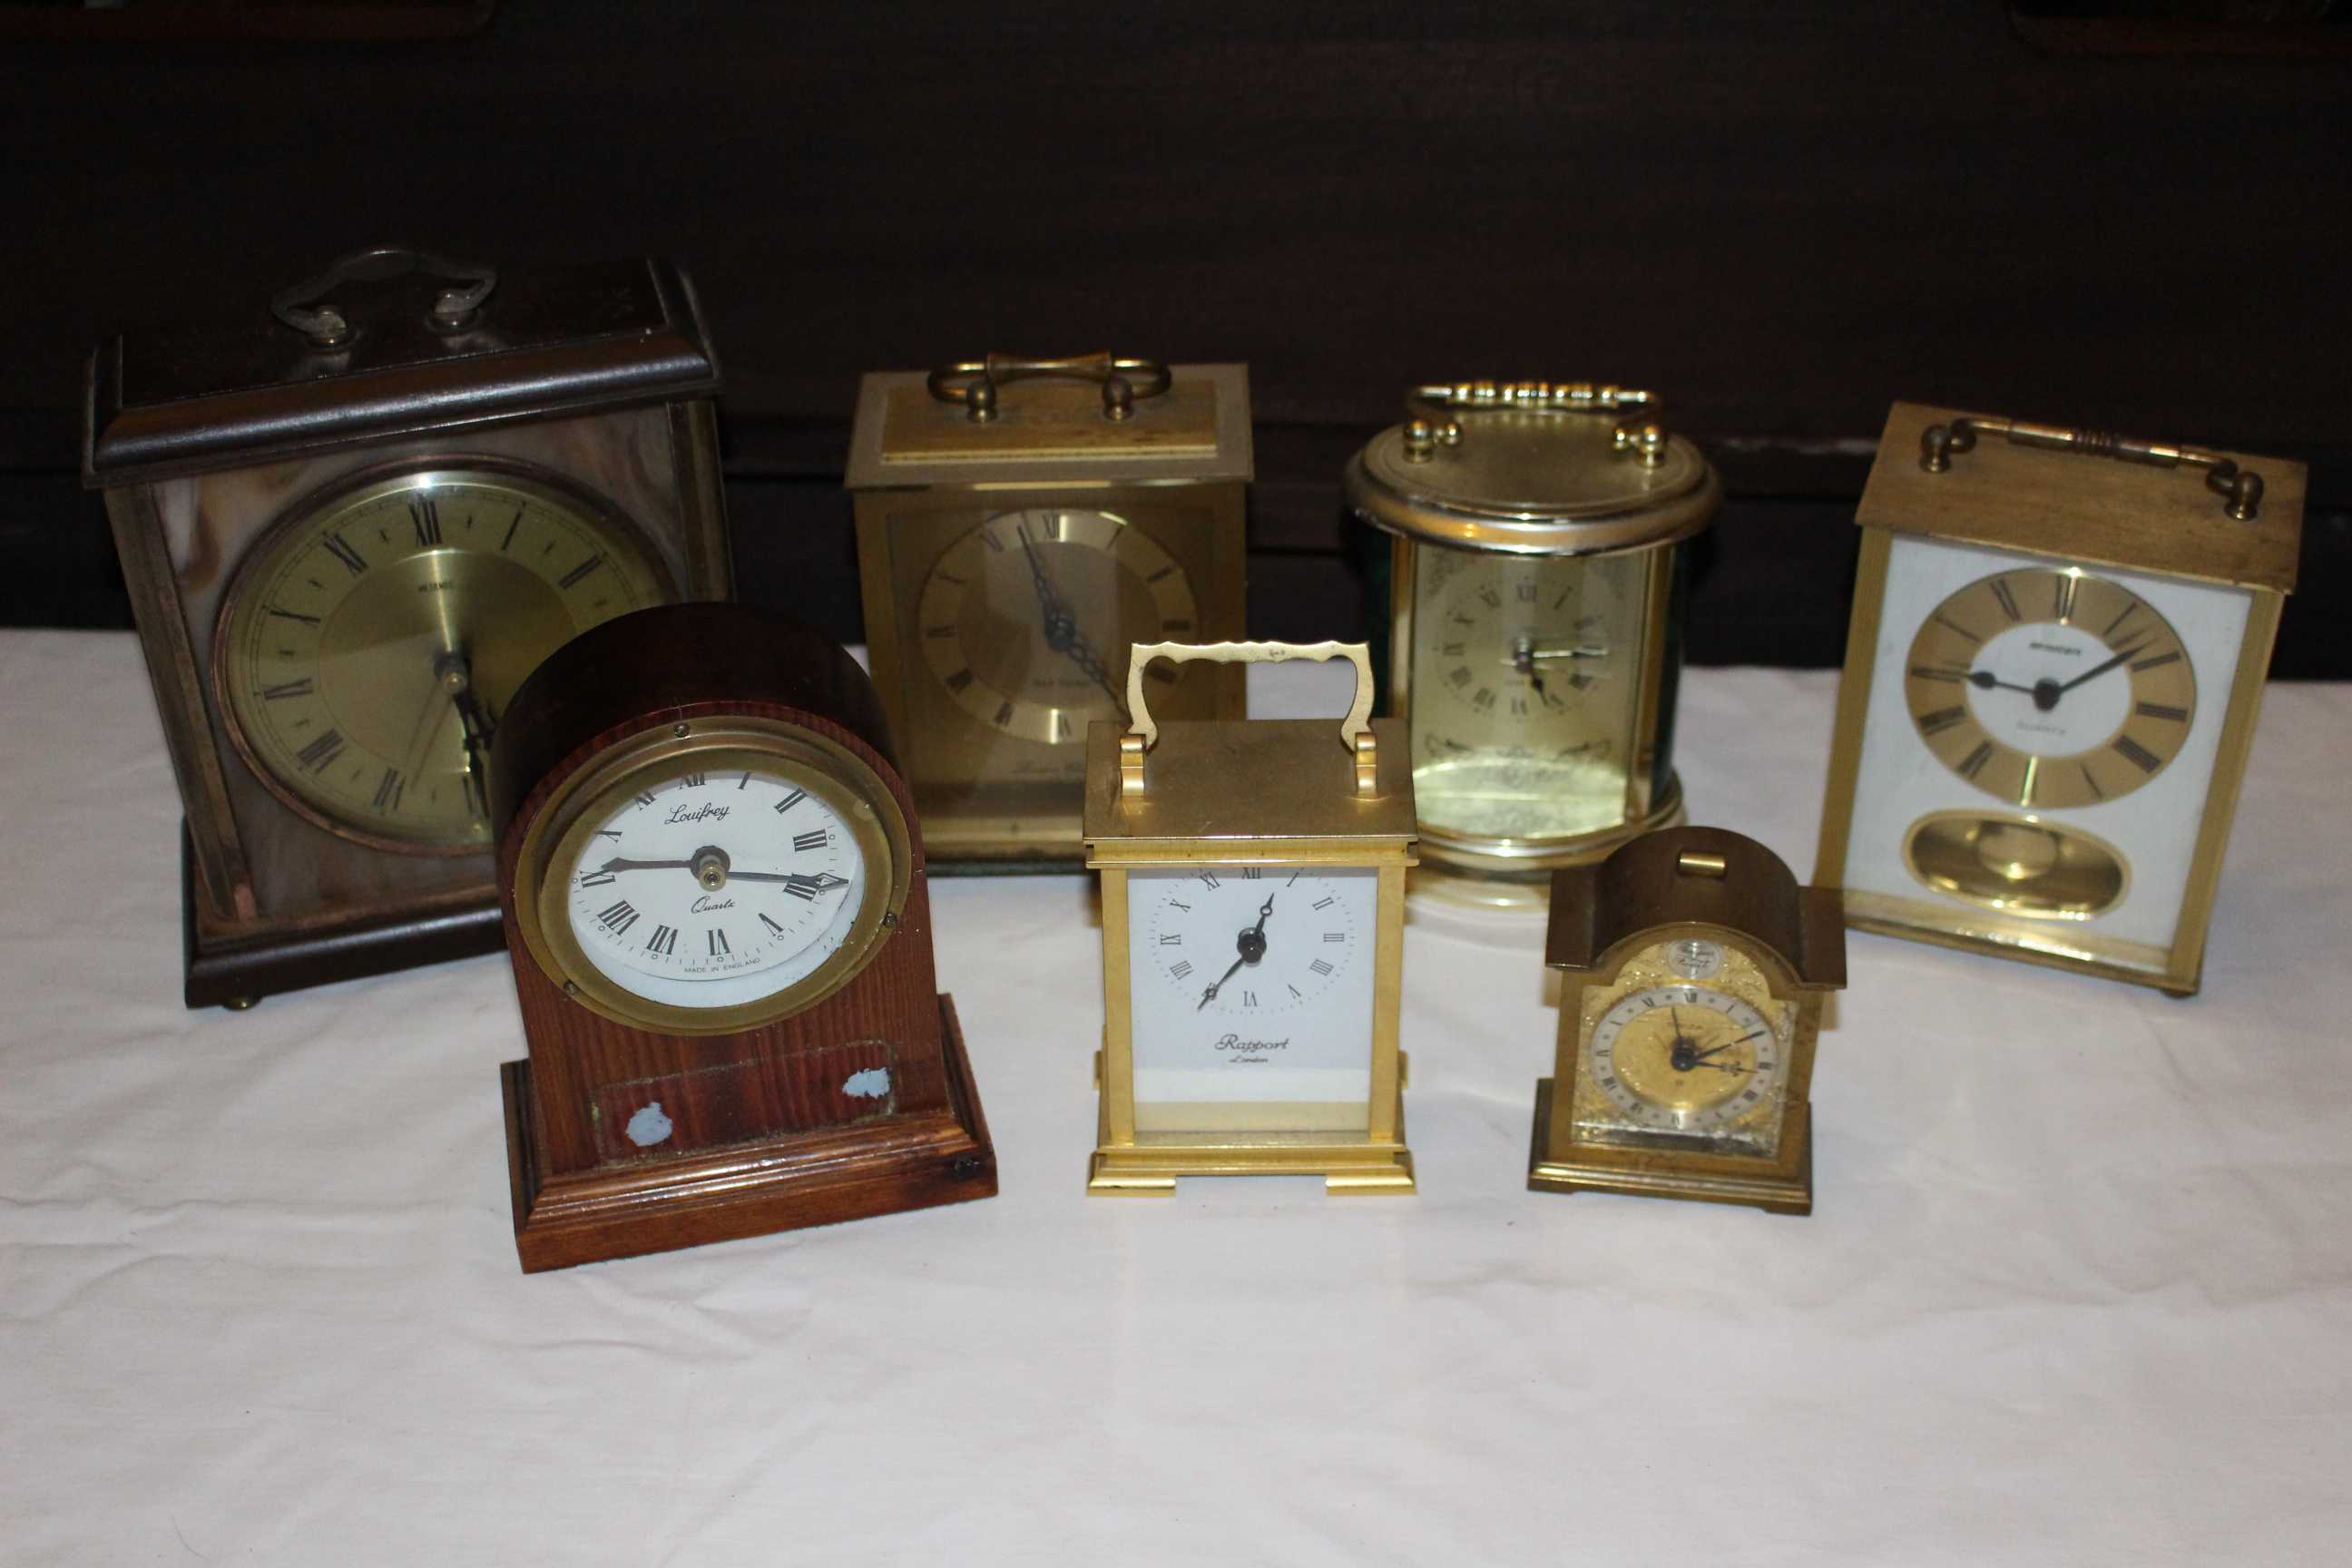 Collection of 7 x Carriage/mantel clocks mixture of brass wood plastic, battery and or mechanical